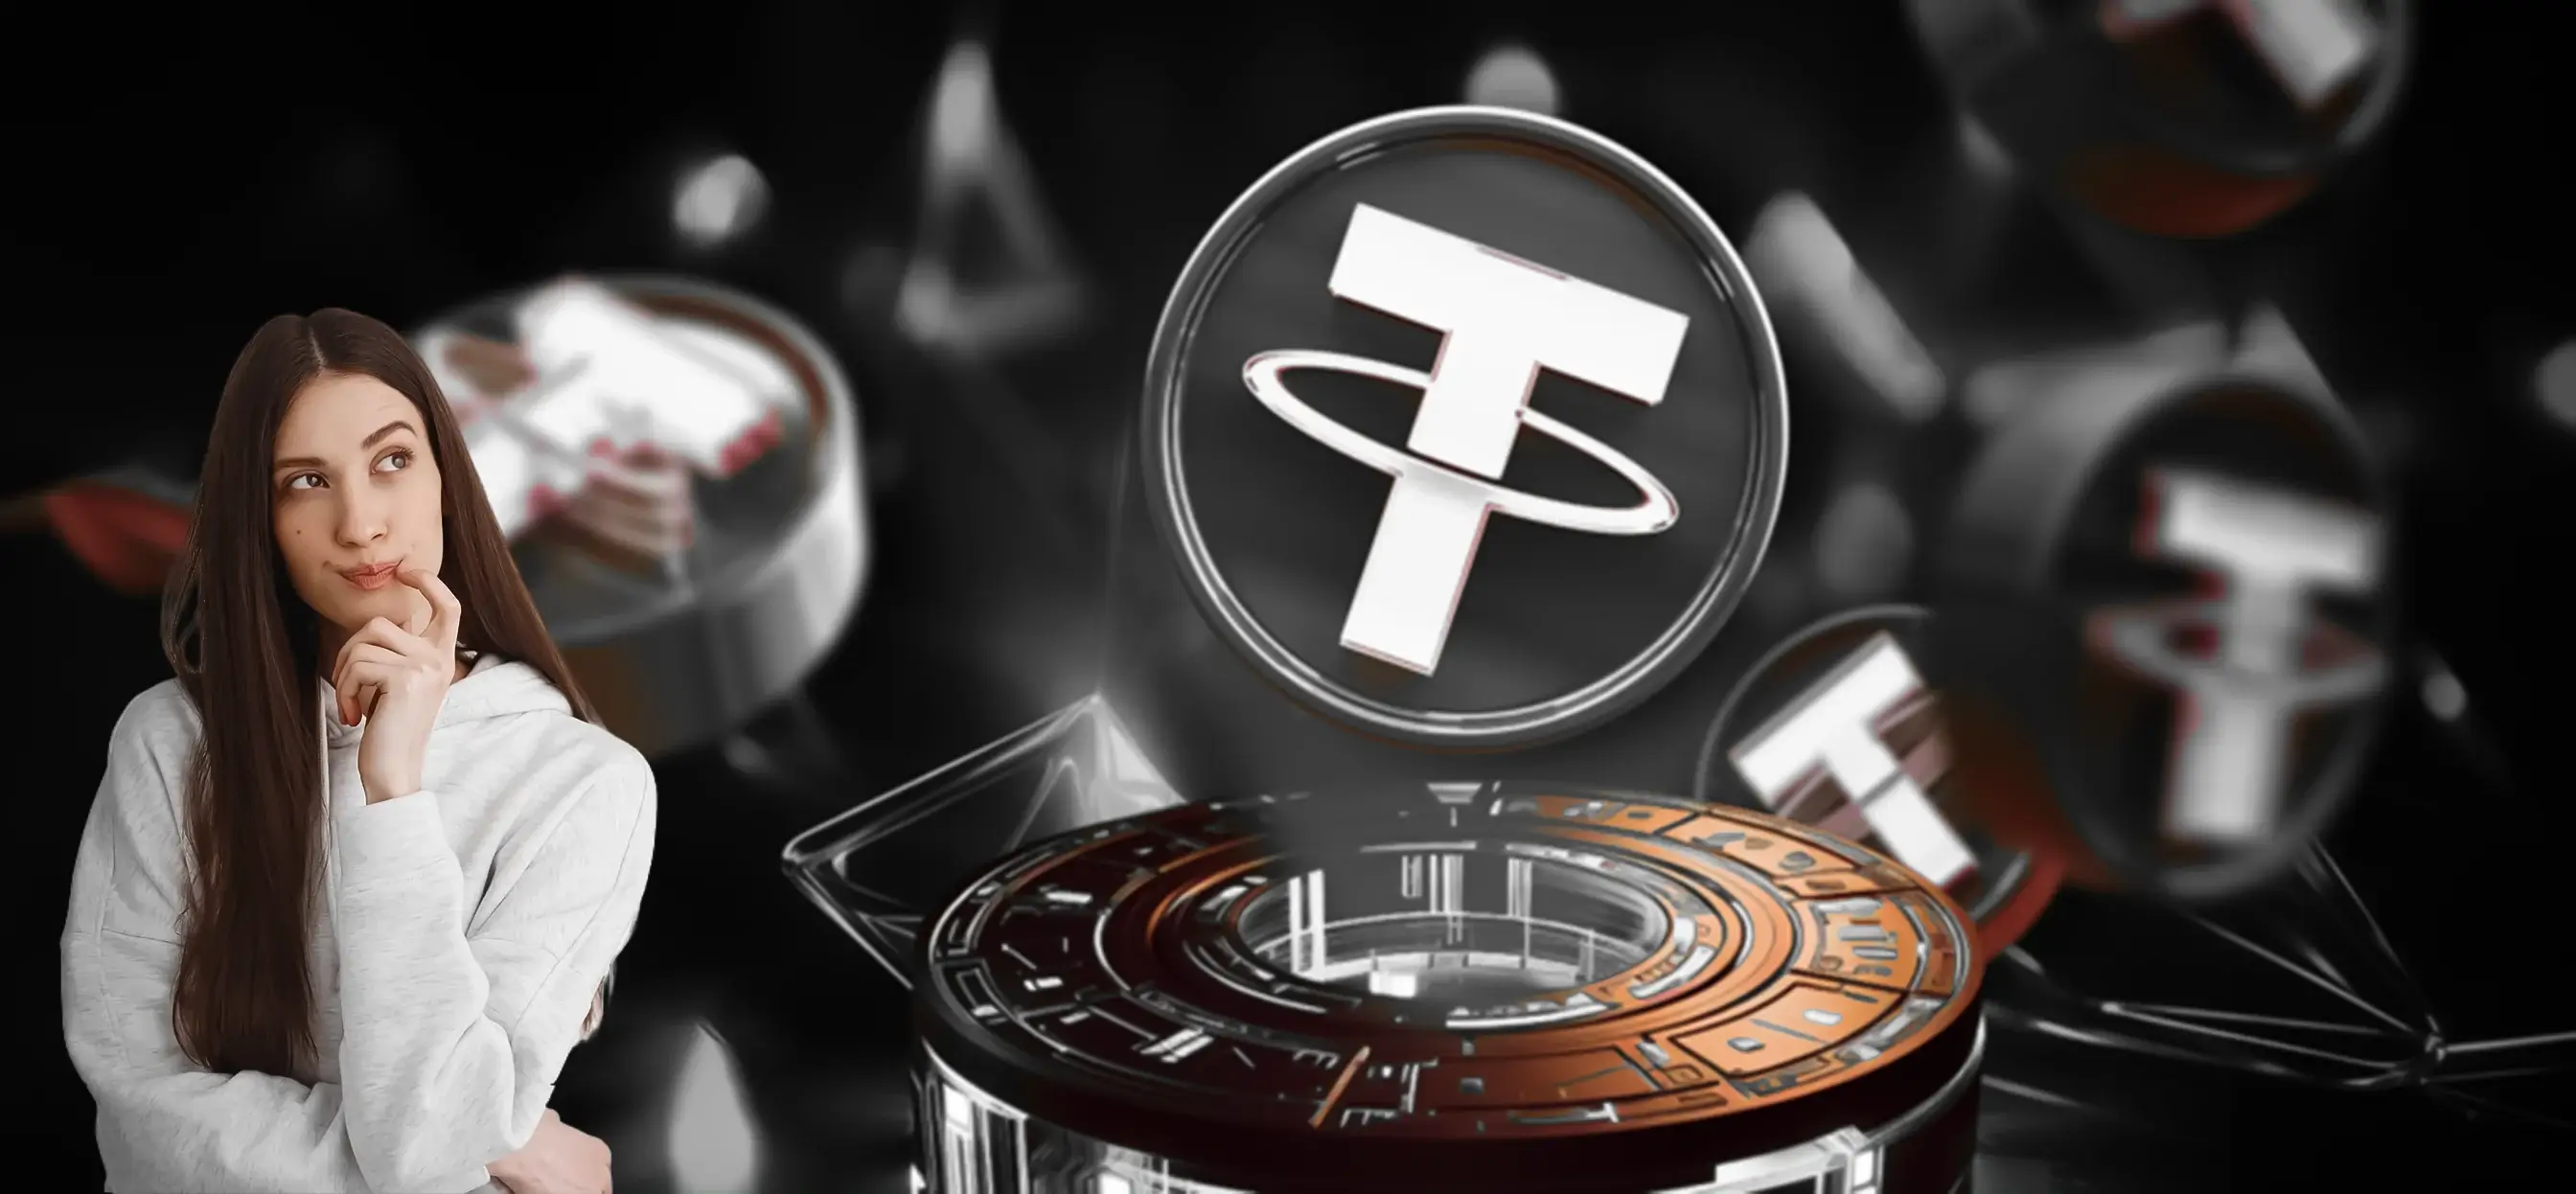 Tether cryptocurrency